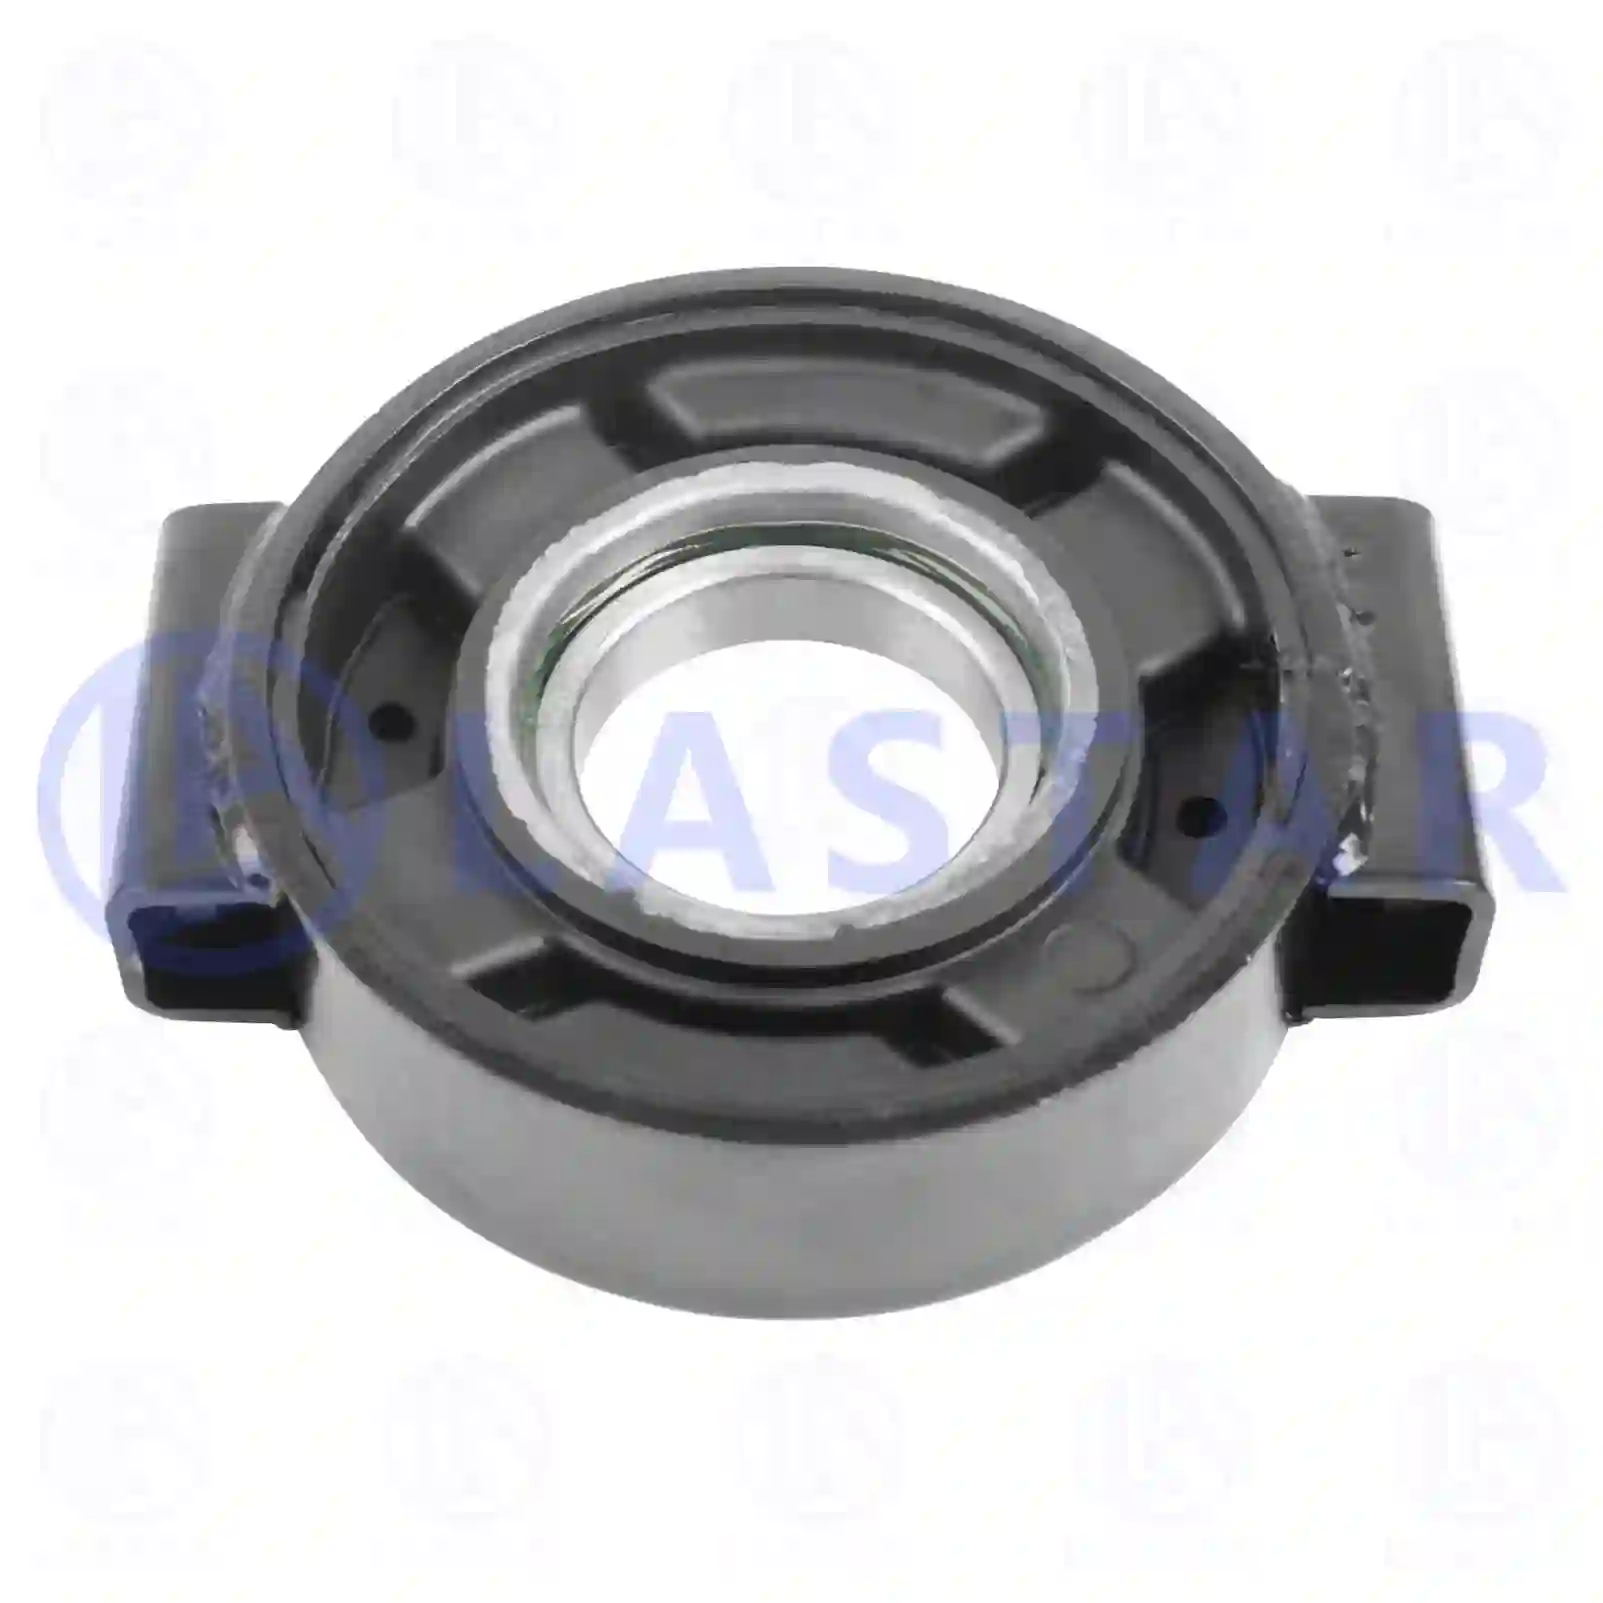 Center bearing, 77734261, 4004110112, 65941 ||  77734261 Lastar Spare Part | Truck Spare Parts, Auotomotive Spare Parts Center bearing, 77734261, 4004110112, 65941 ||  77734261 Lastar Spare Part | Truck Spare Parts, Auotomotive Spare Parts